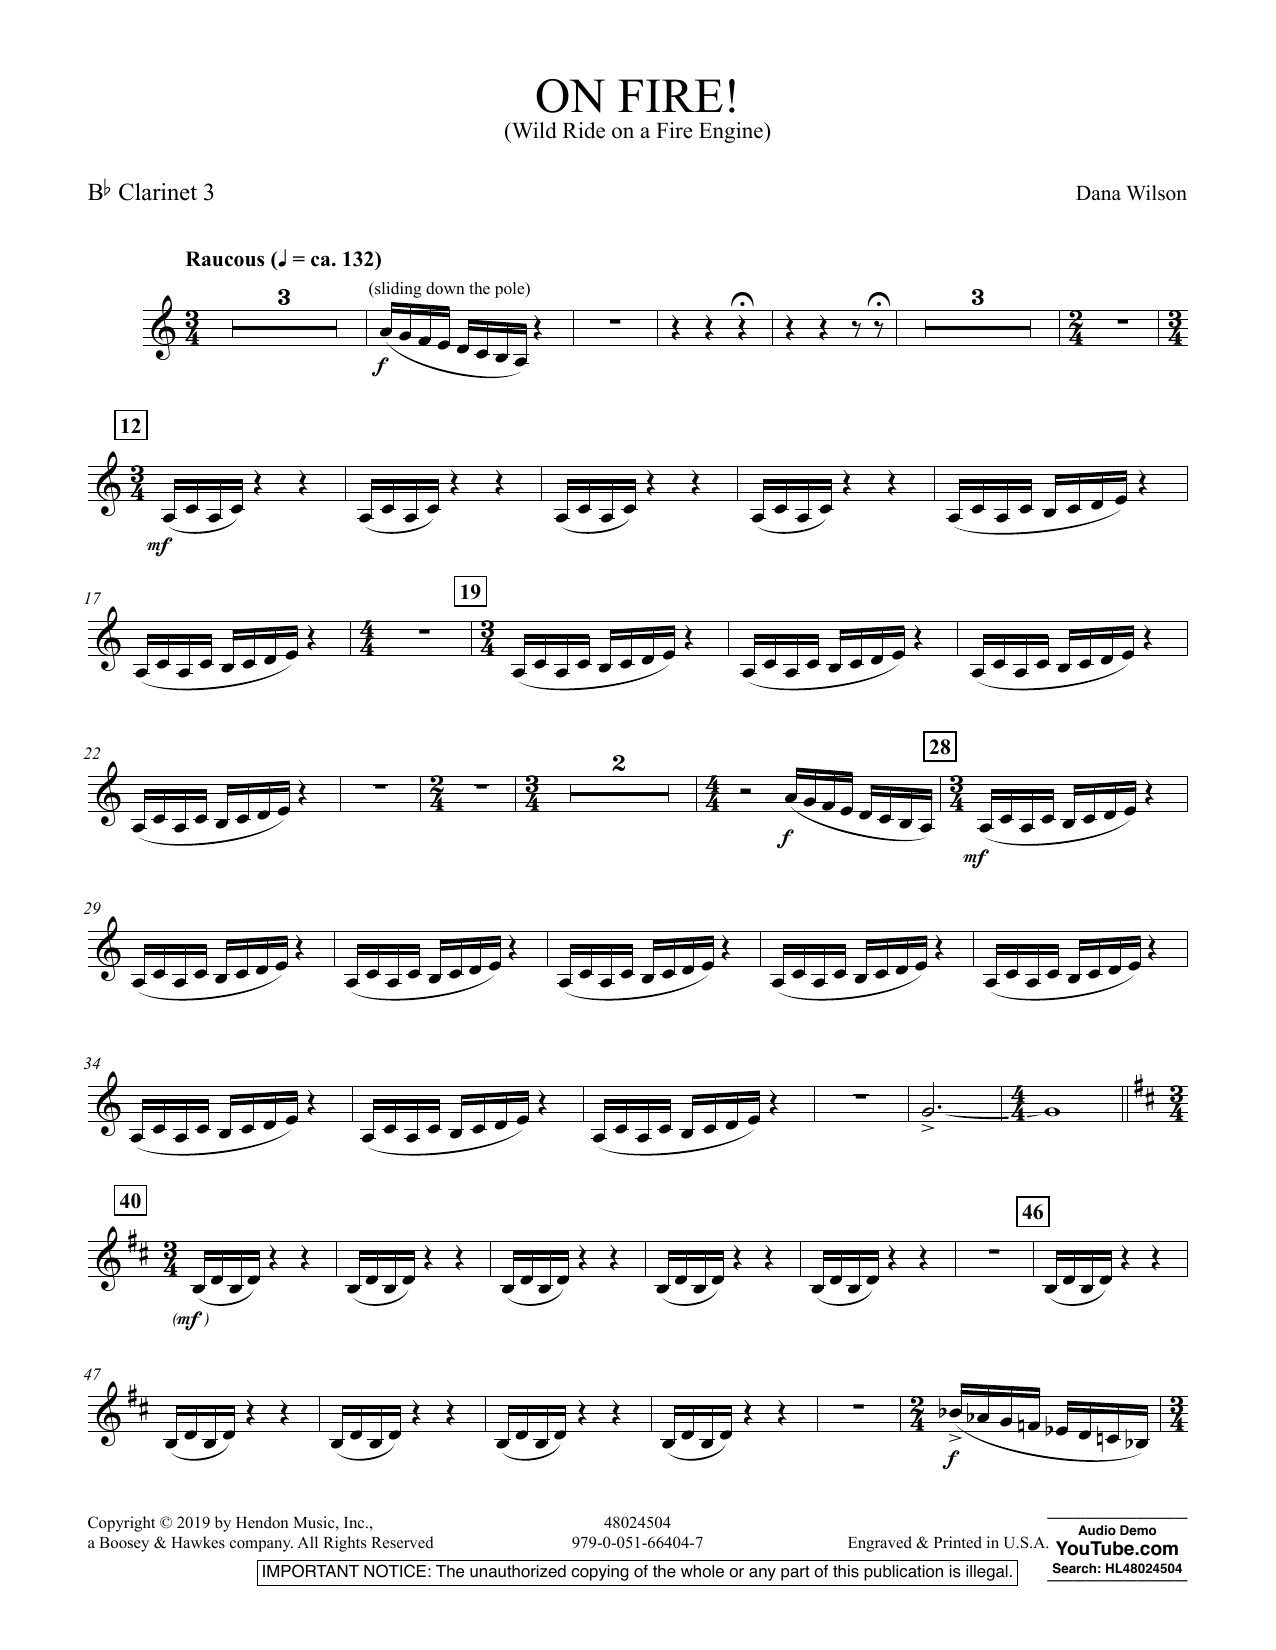 Dana Wilson On Fire! (Wild Ride on a Fire Engine) - Bb Clarinet 3 sheet music preview music notes and score for Concert Band including 2 page(s)